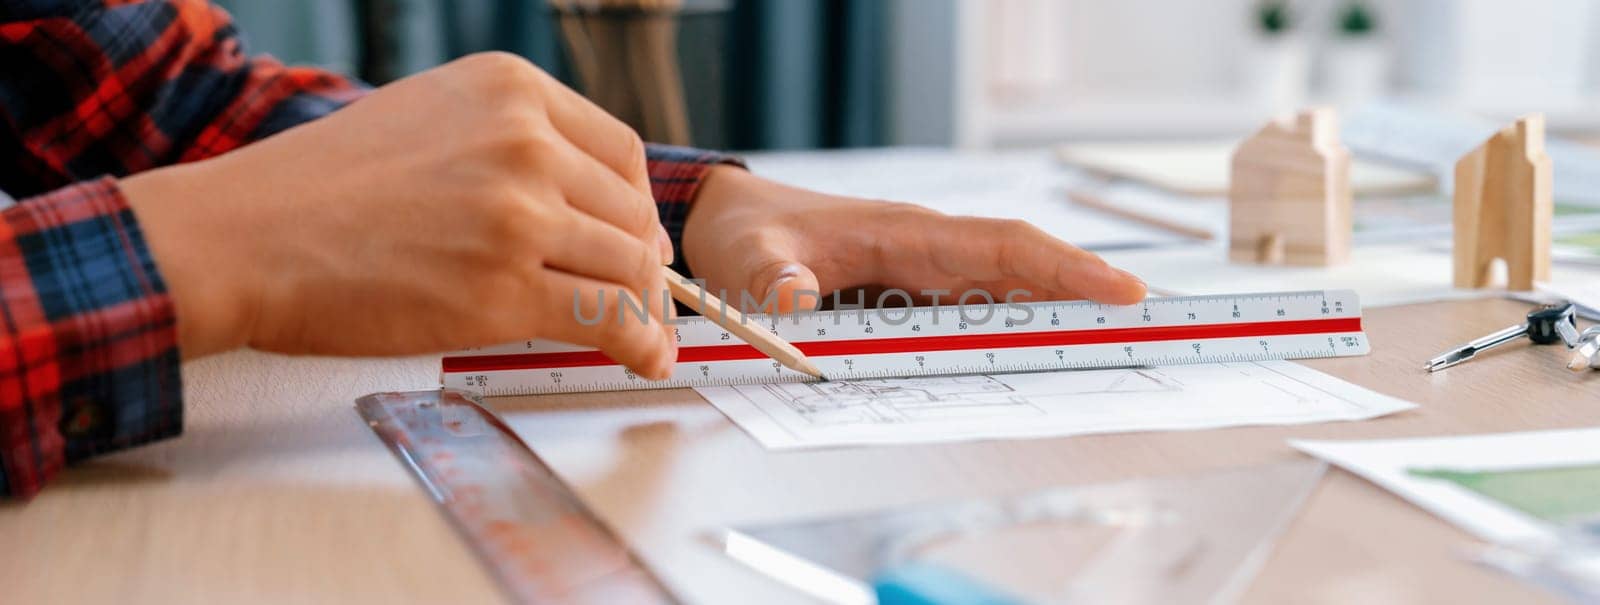 Closeup of architect engineer hand using ruler to mature and draw a blueprint on meeting table with wooden block, pencil and blueprint scatter around at architectural modern office. Delineation.